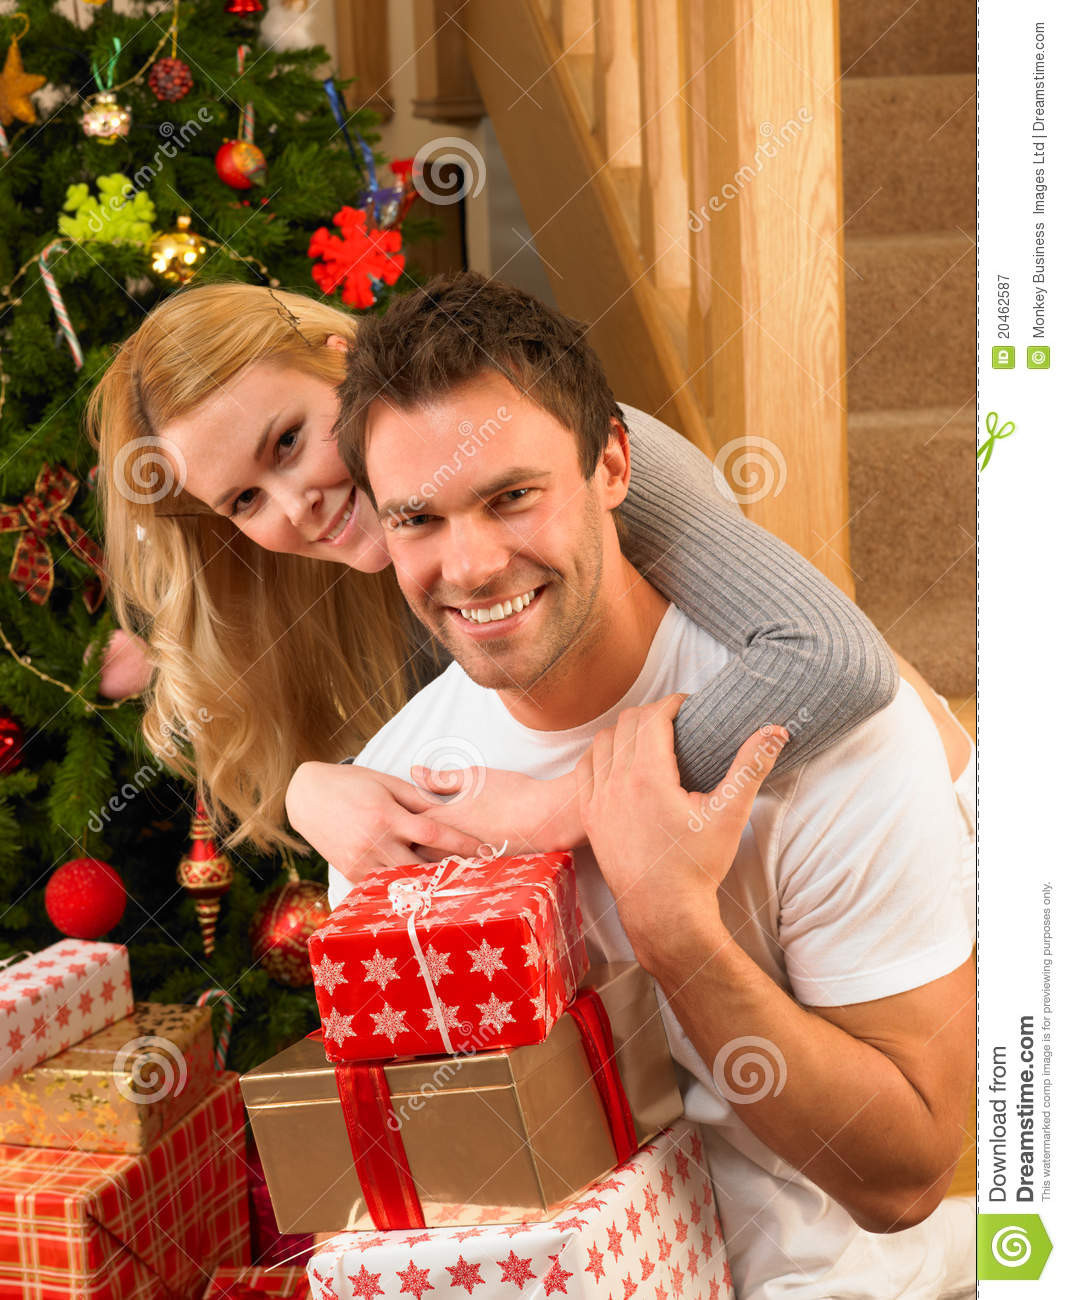 Gift Ideas For Young Couple
 Young Couple At Christmas Exchanging Gifts Royalty Free